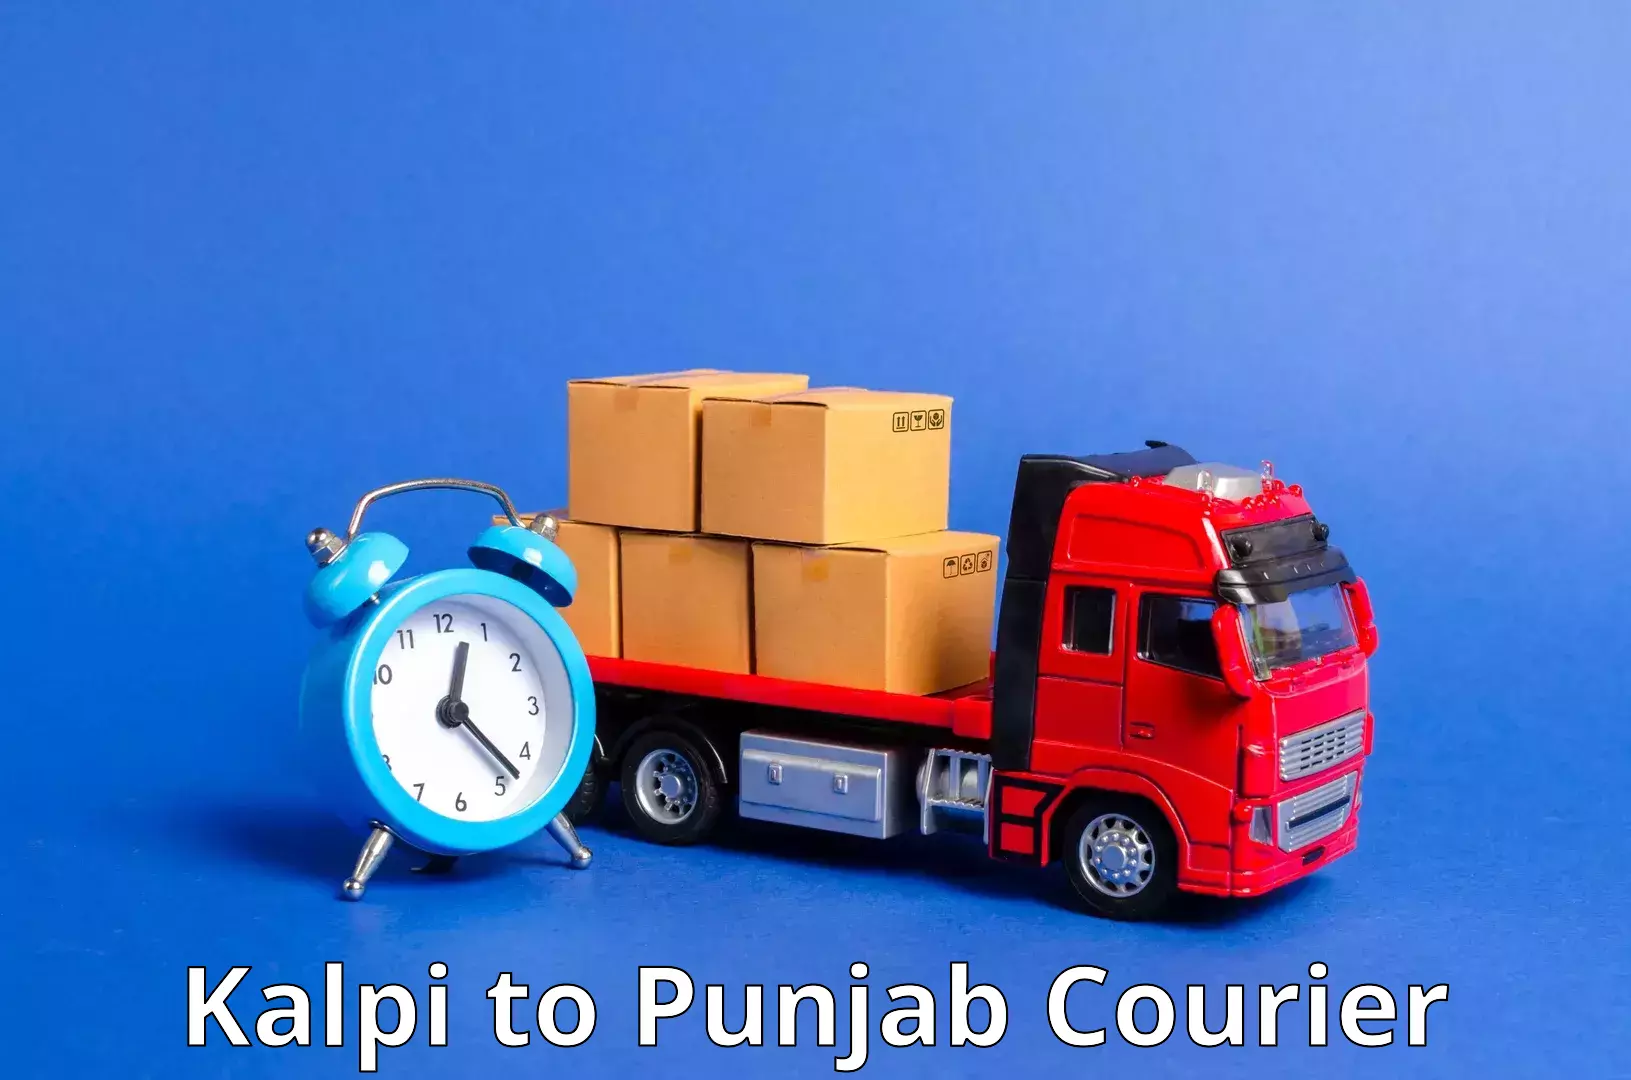 Reliable package handling Kalpi to Ludhiana